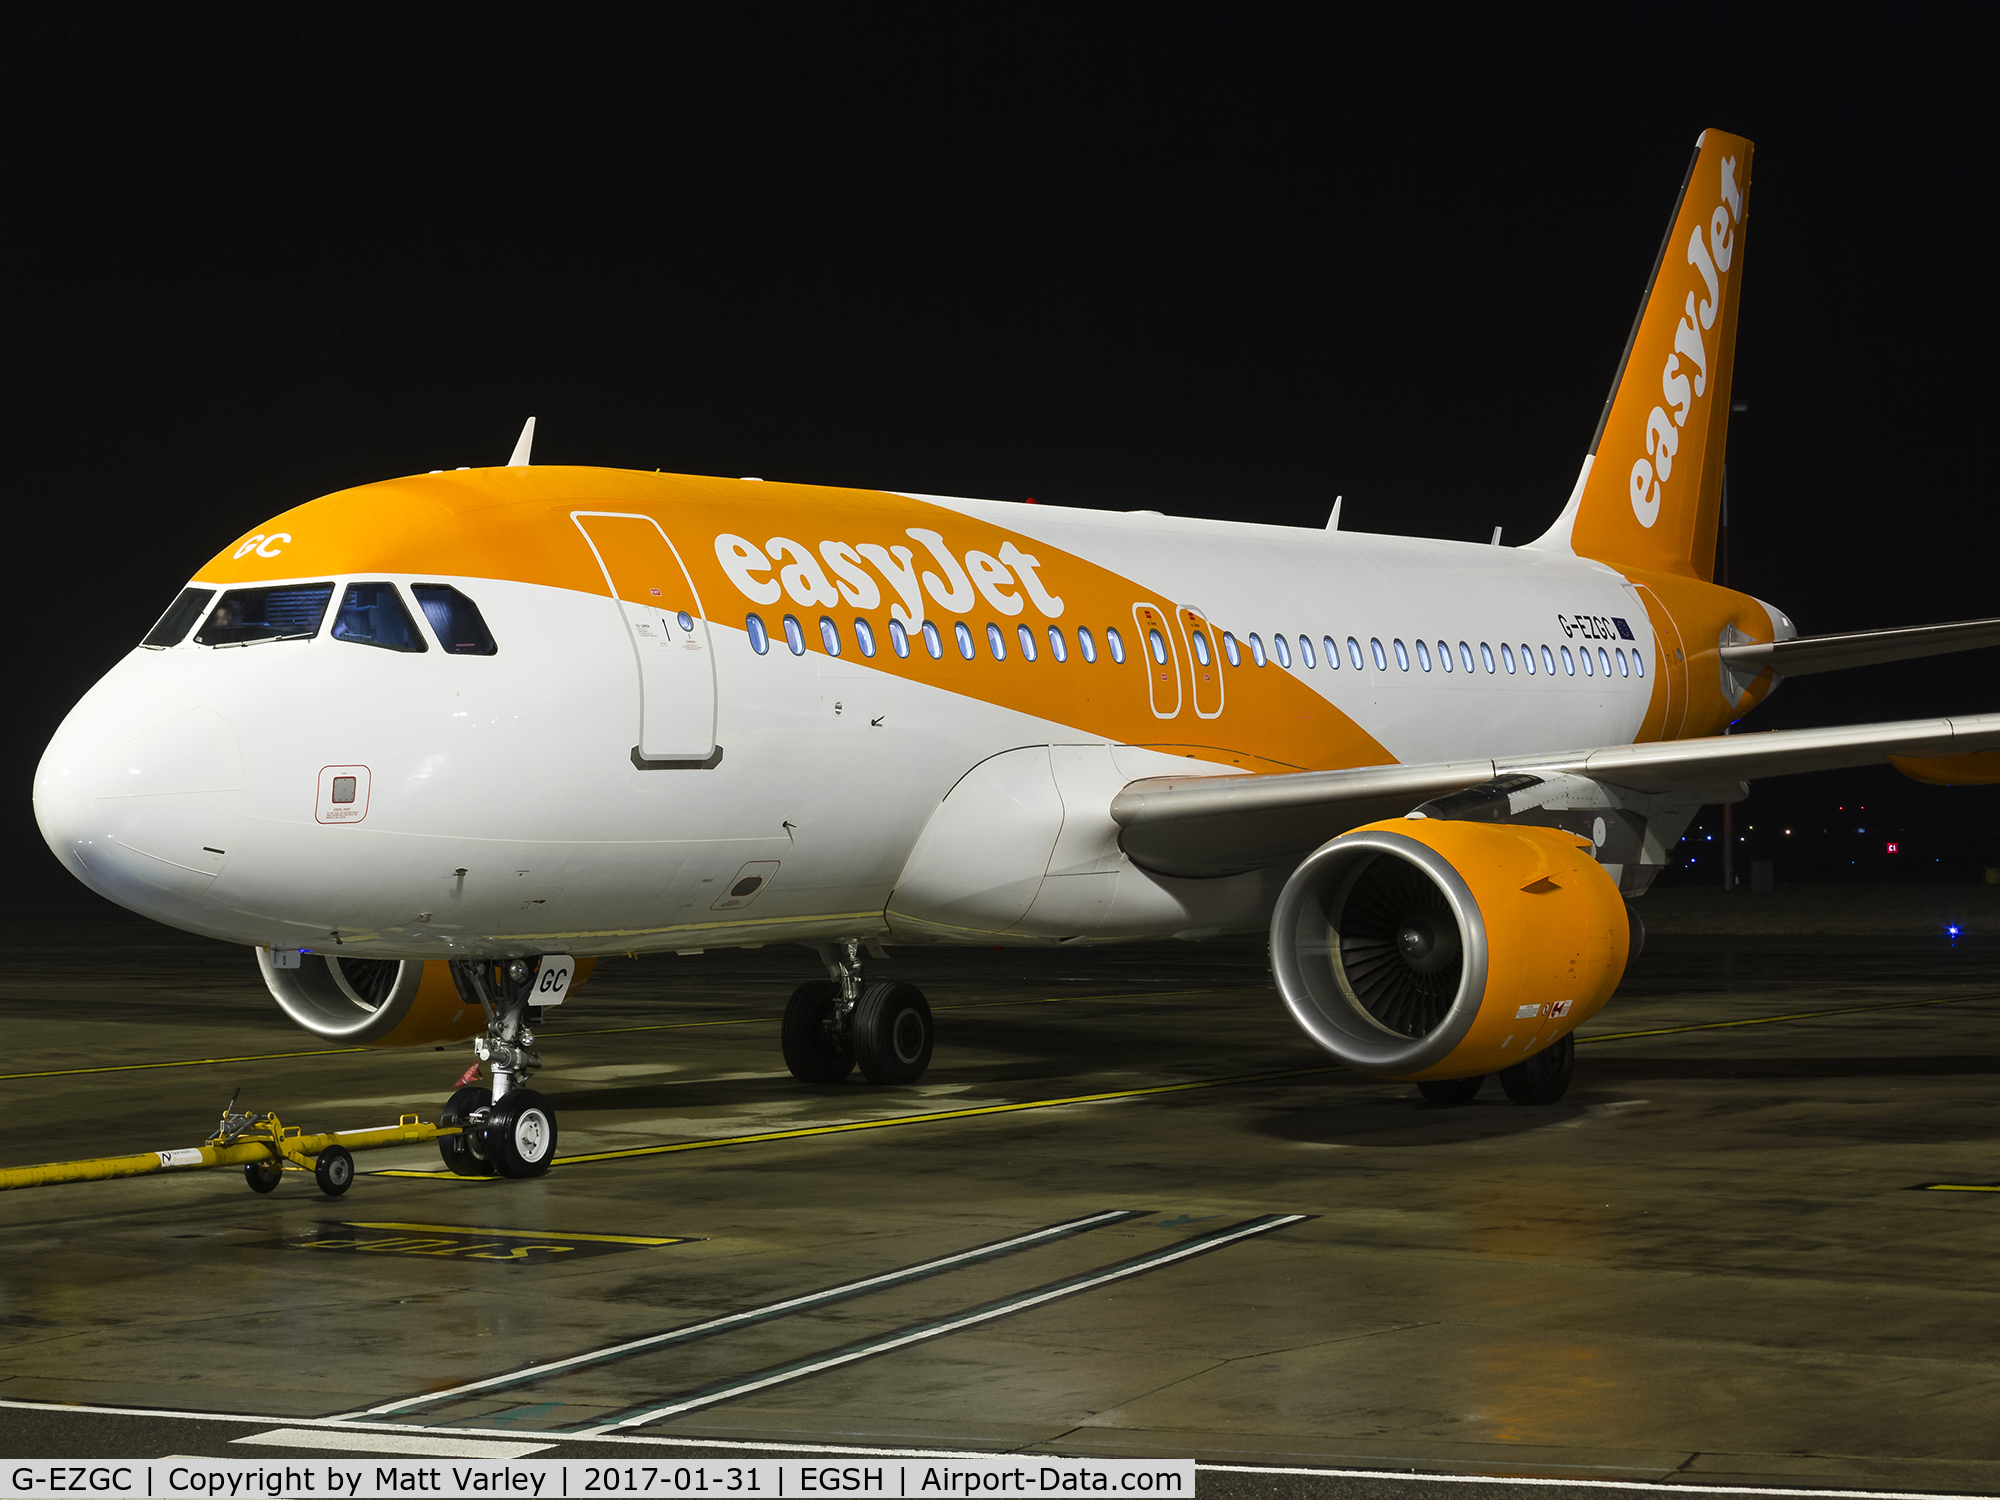 G-EZGC, 2010 Airbus A319-111 C/N 4444, Sat on stand 5 @ NWI....